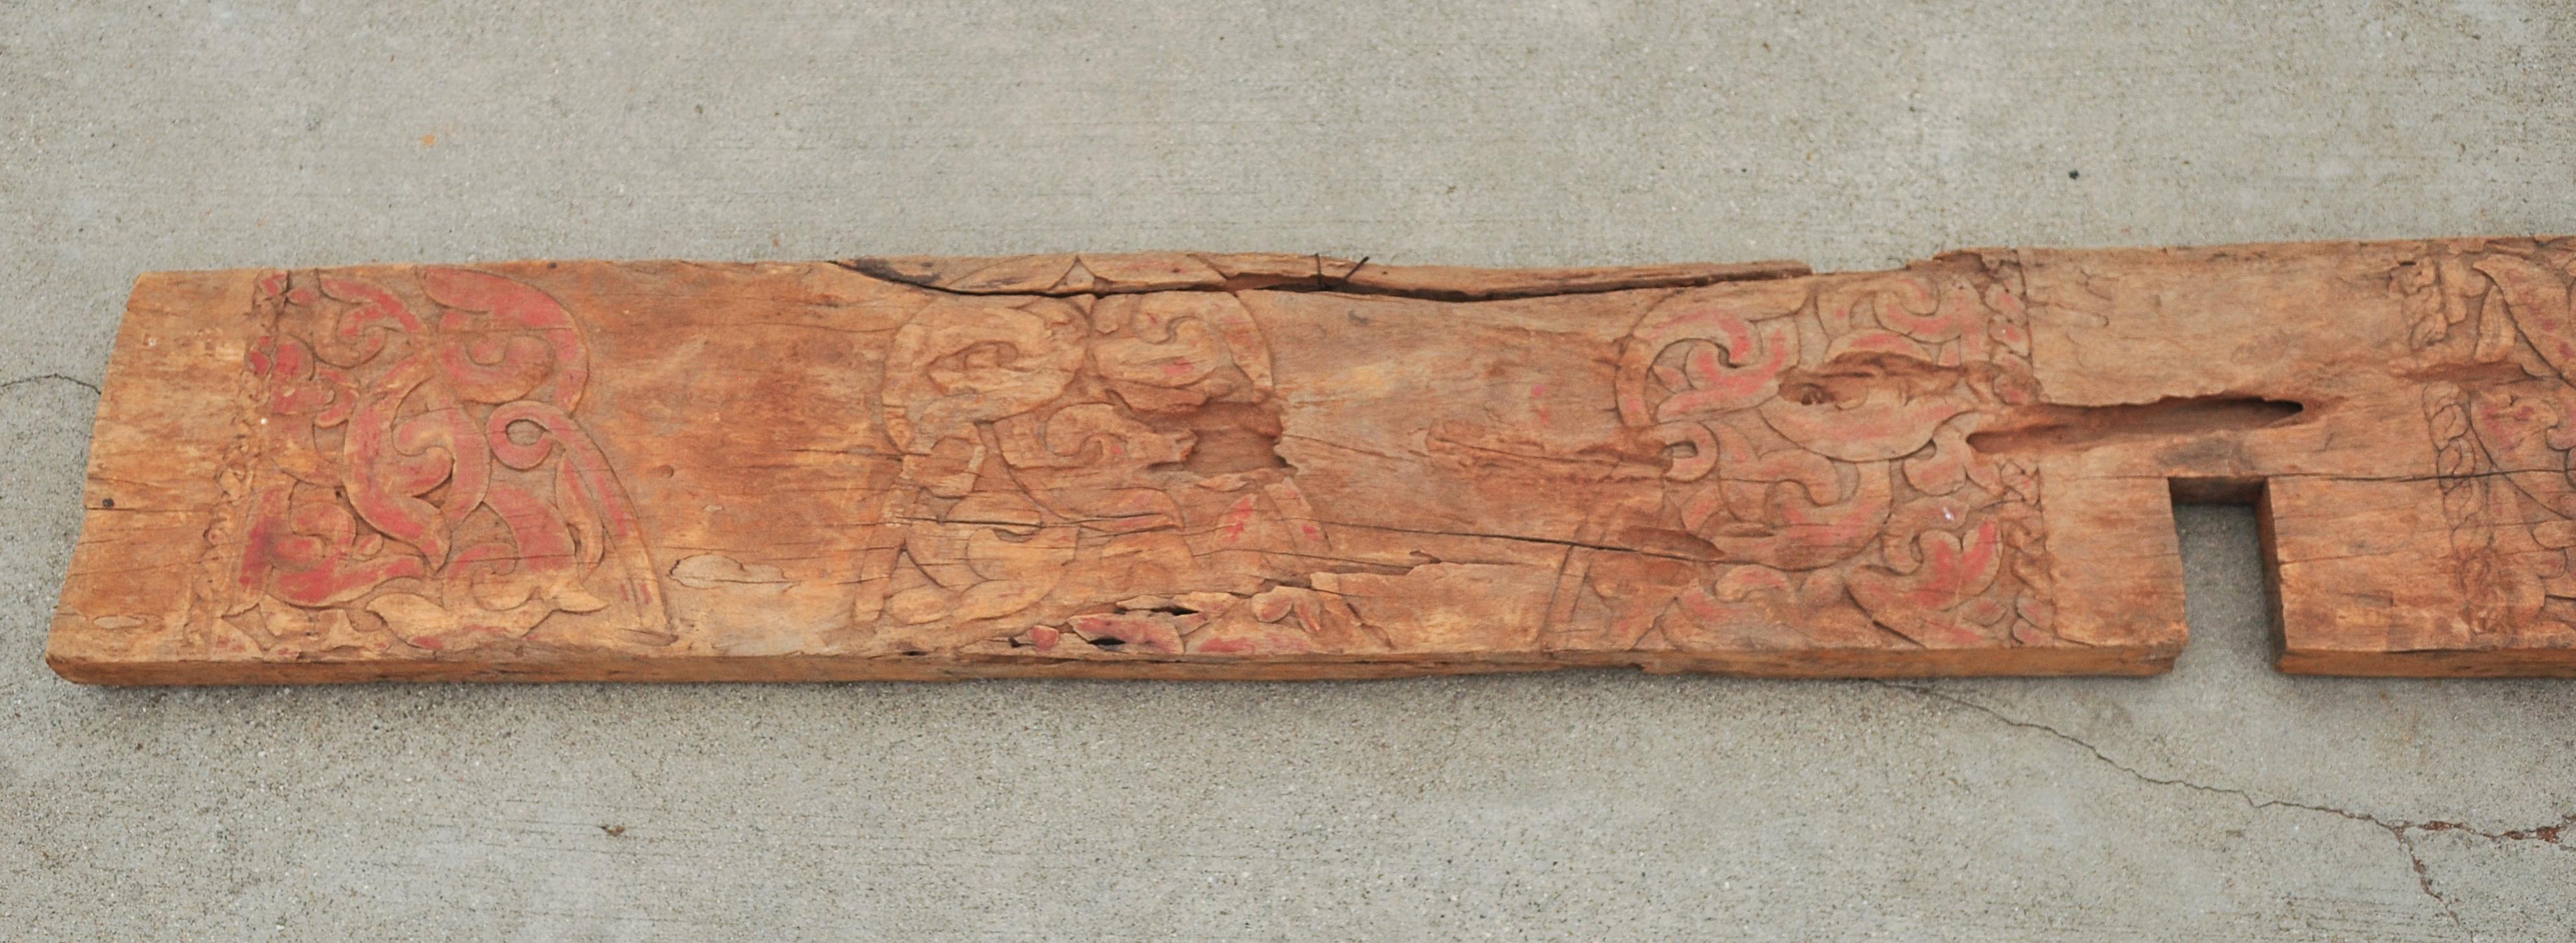 Carved Architectural Beam, Dayak, Borneo Longhouse, Mid-20th Century 4